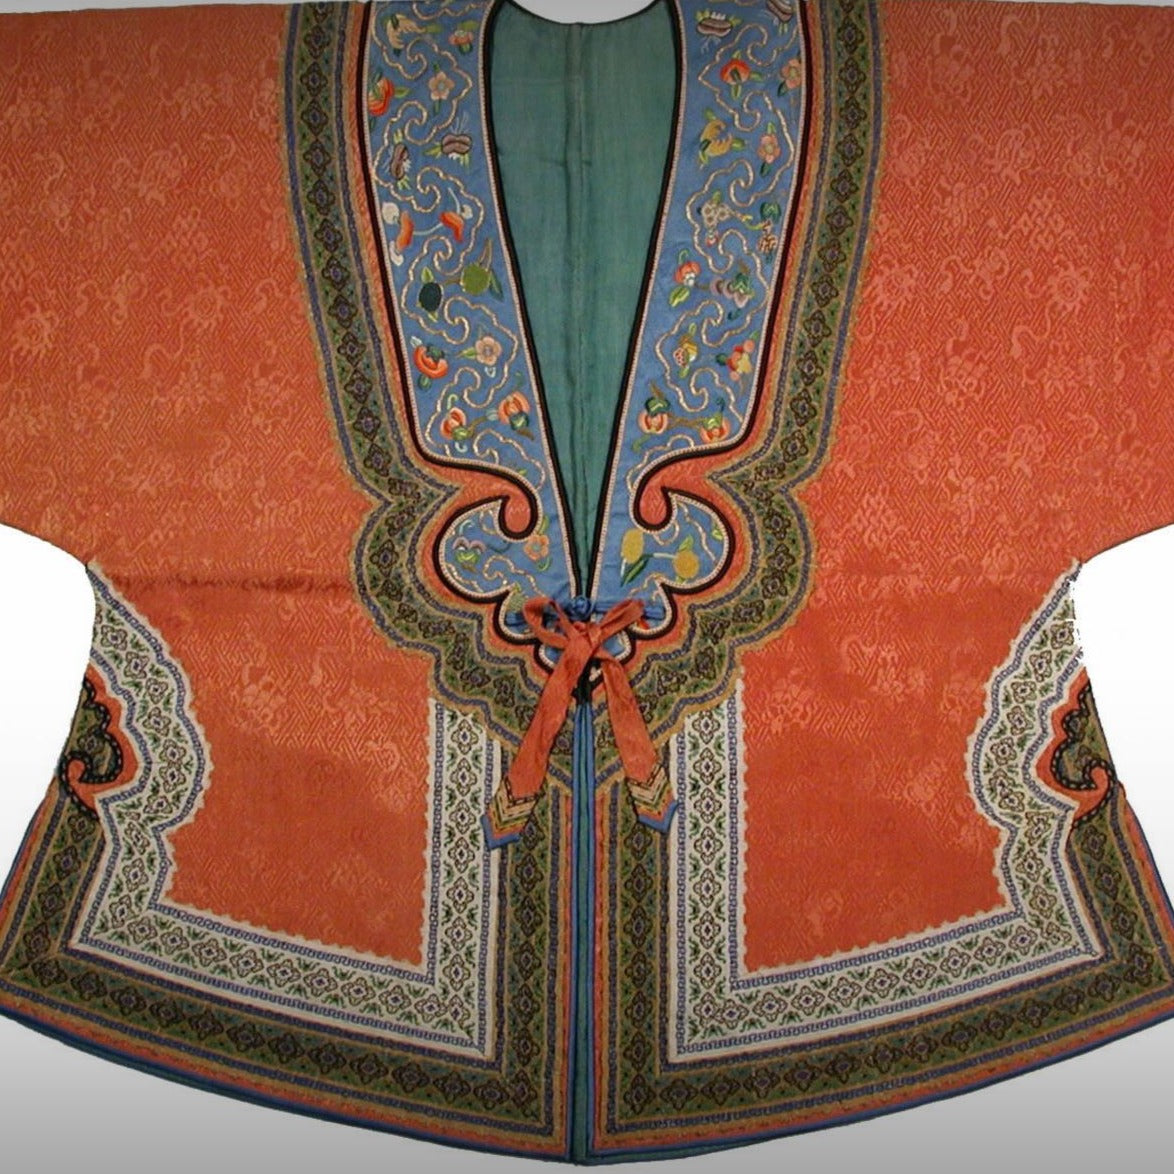 United States, Chicago, Illinois, Asian Textile Collections, Field Museum